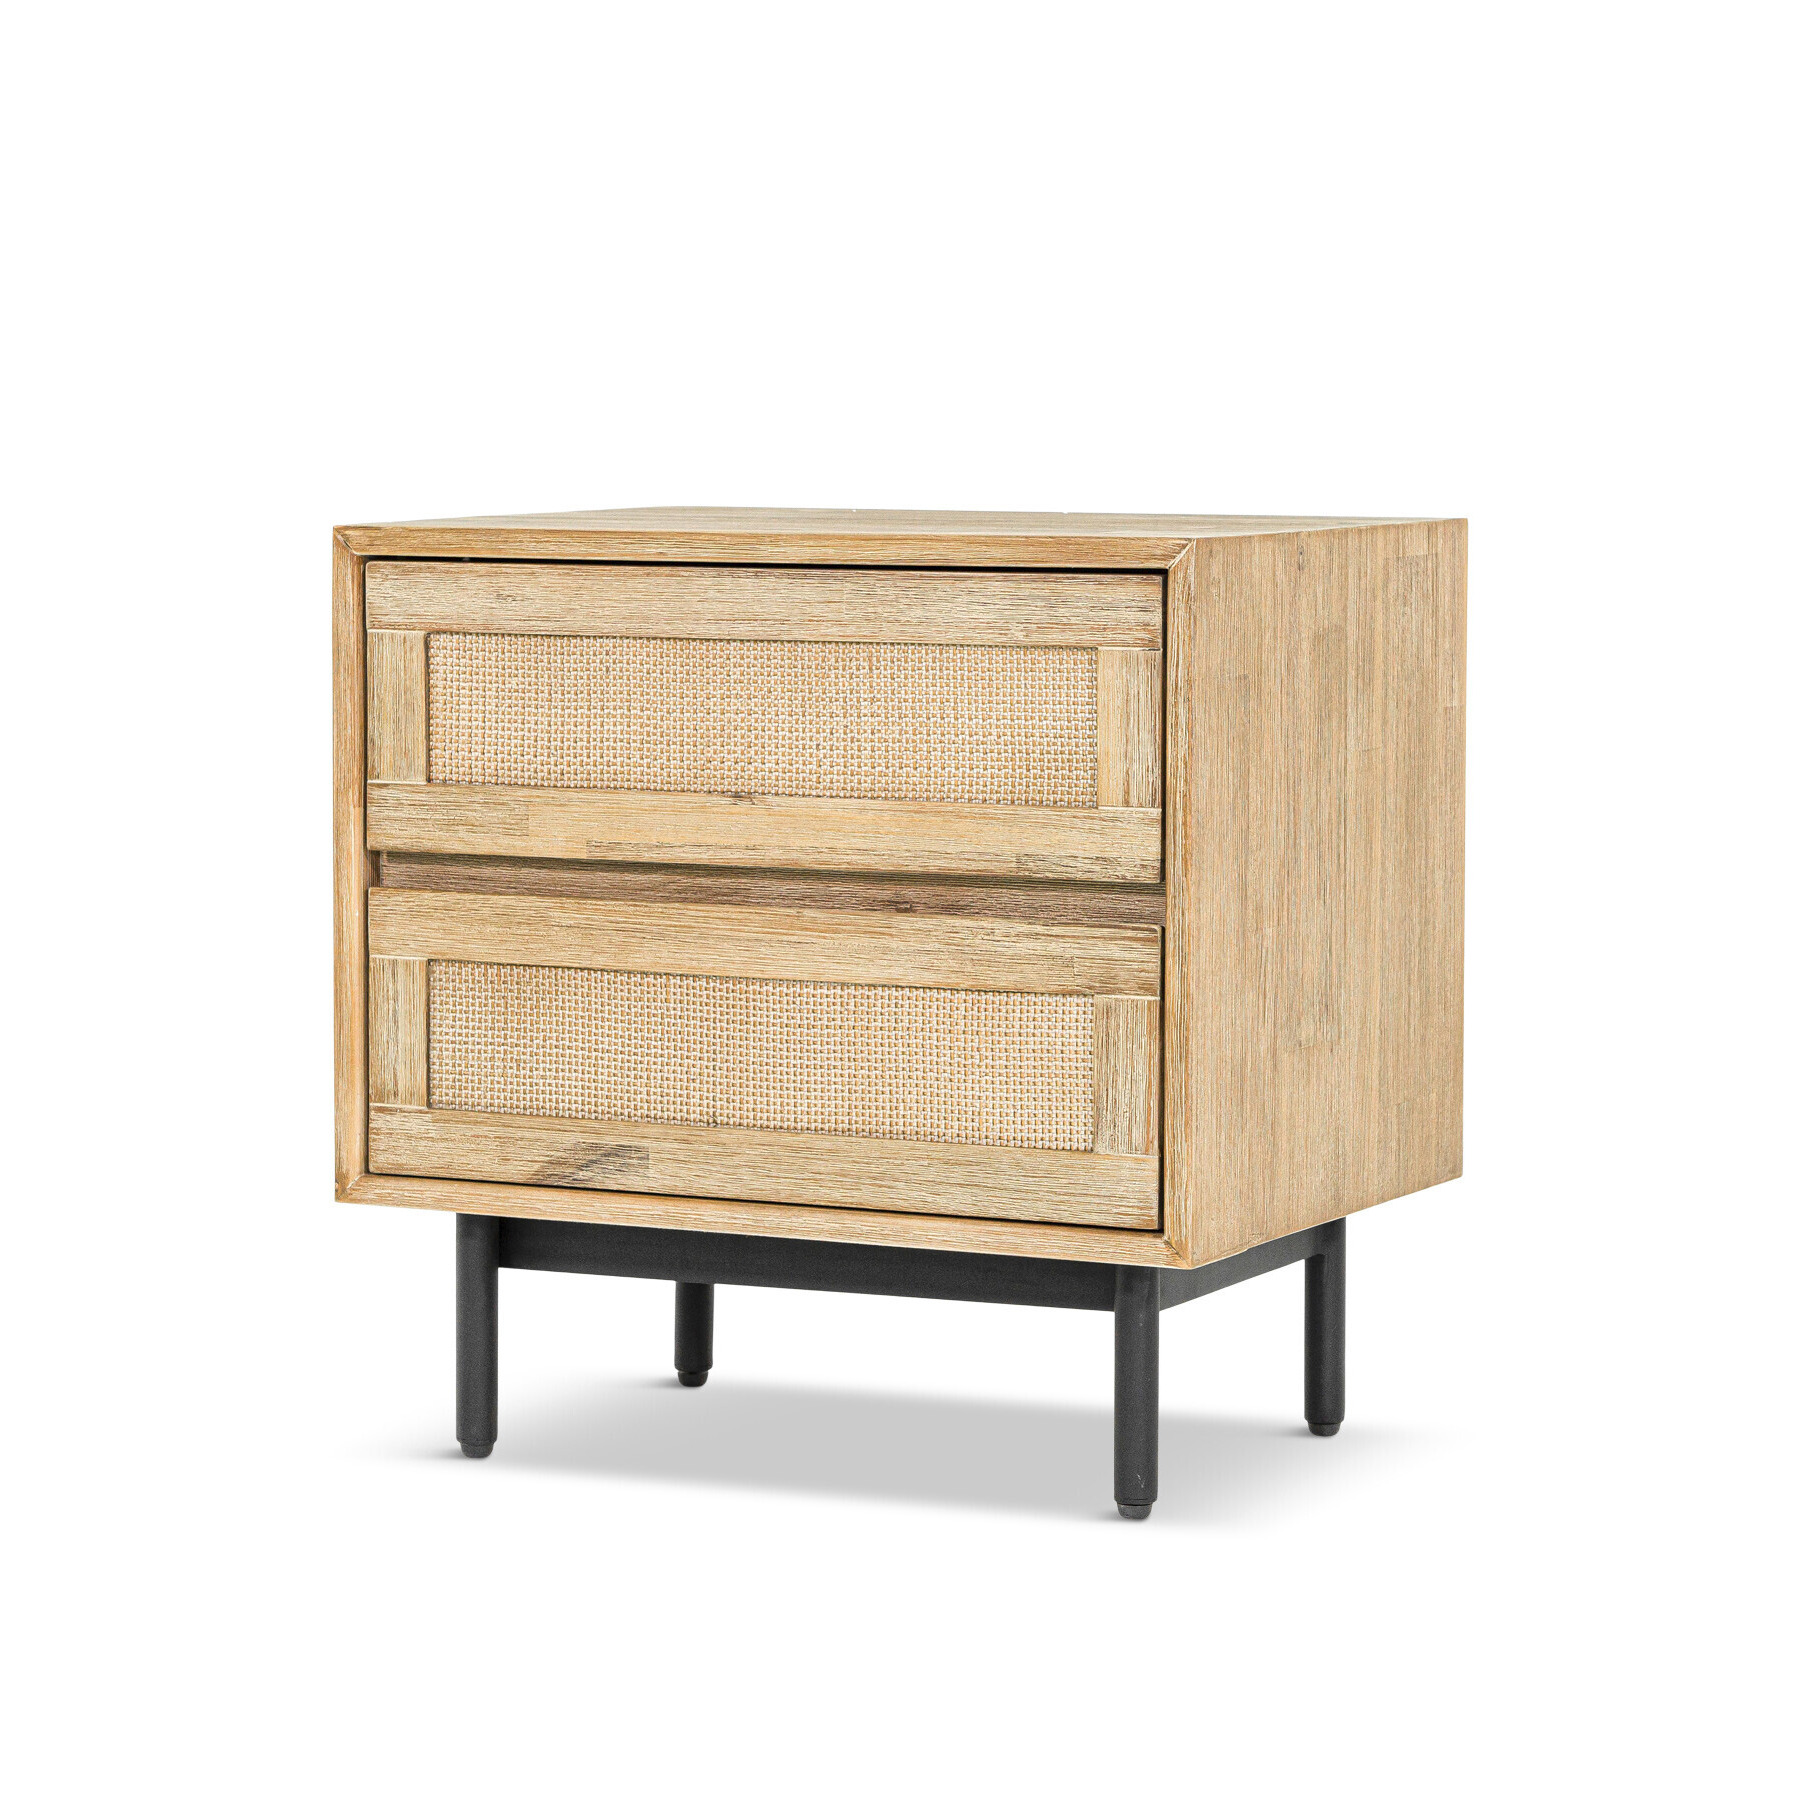 Libra Interiors Maddox Bedside with Two Drawers - Size 45x40x55cm Brown - image 1